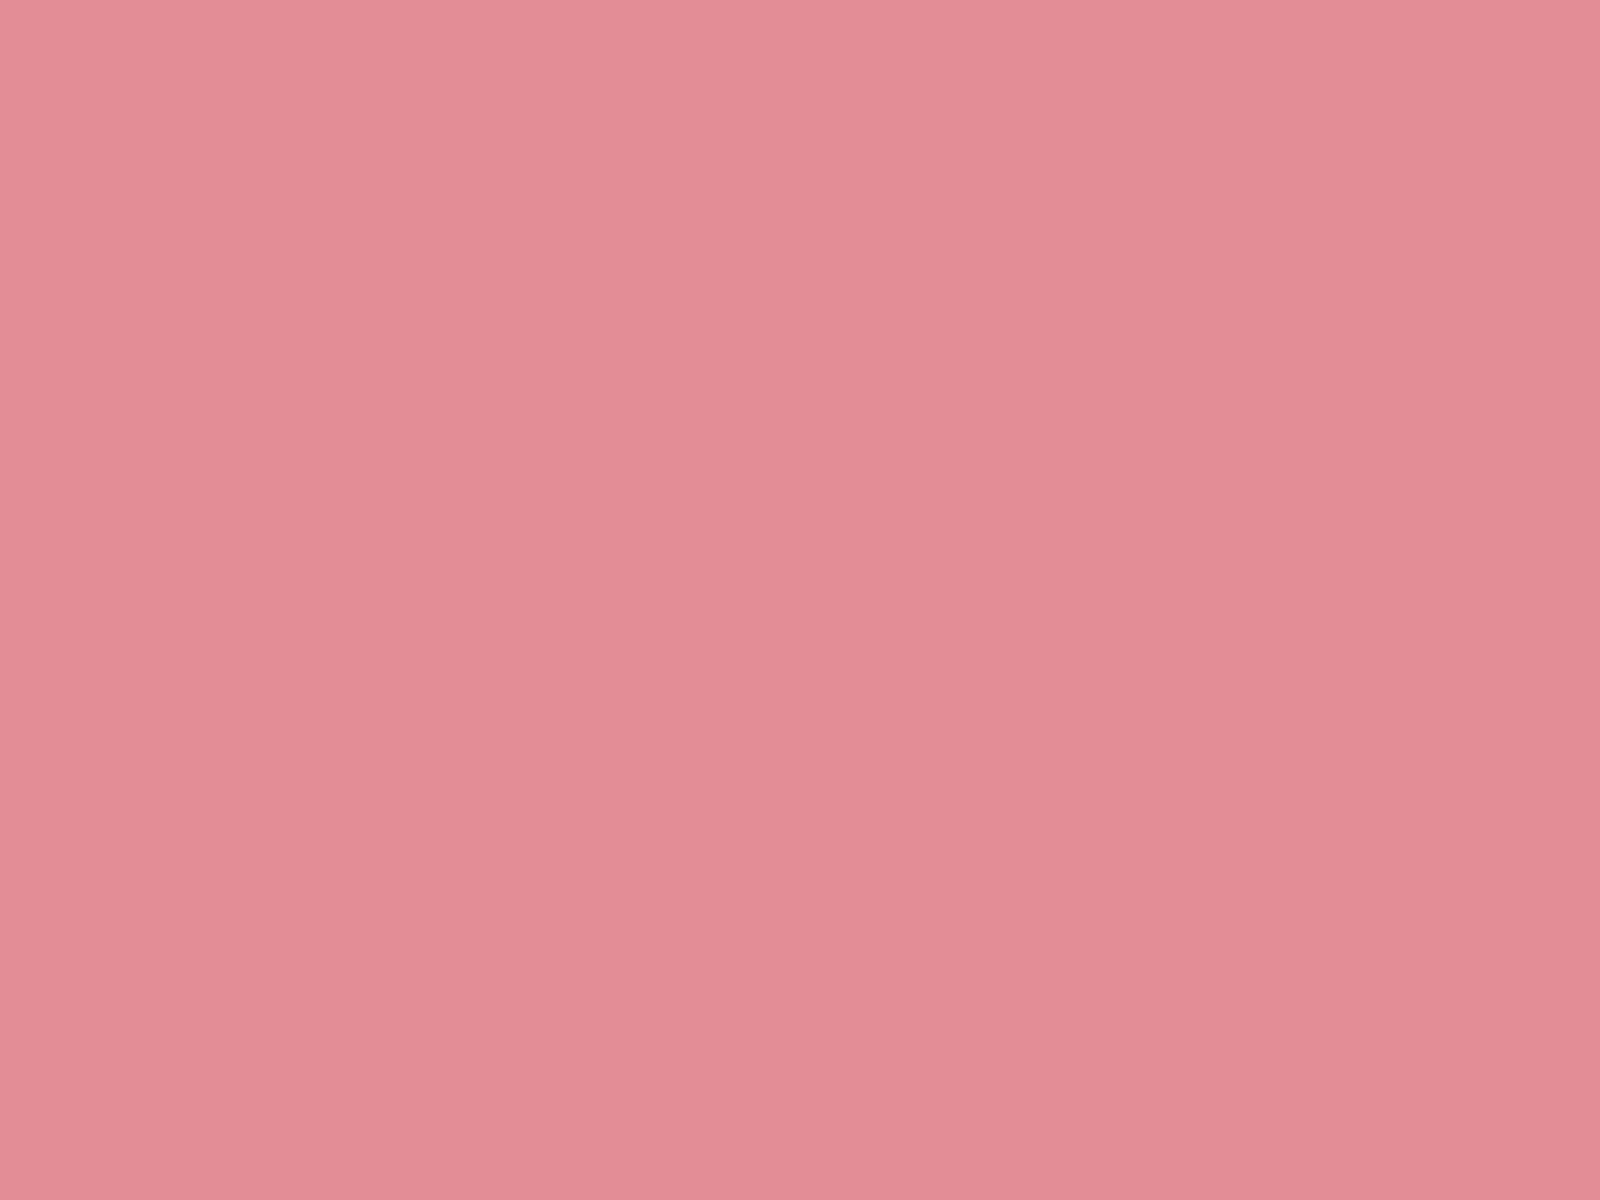 1600x1200 Ruddy Pink Solid Color Background